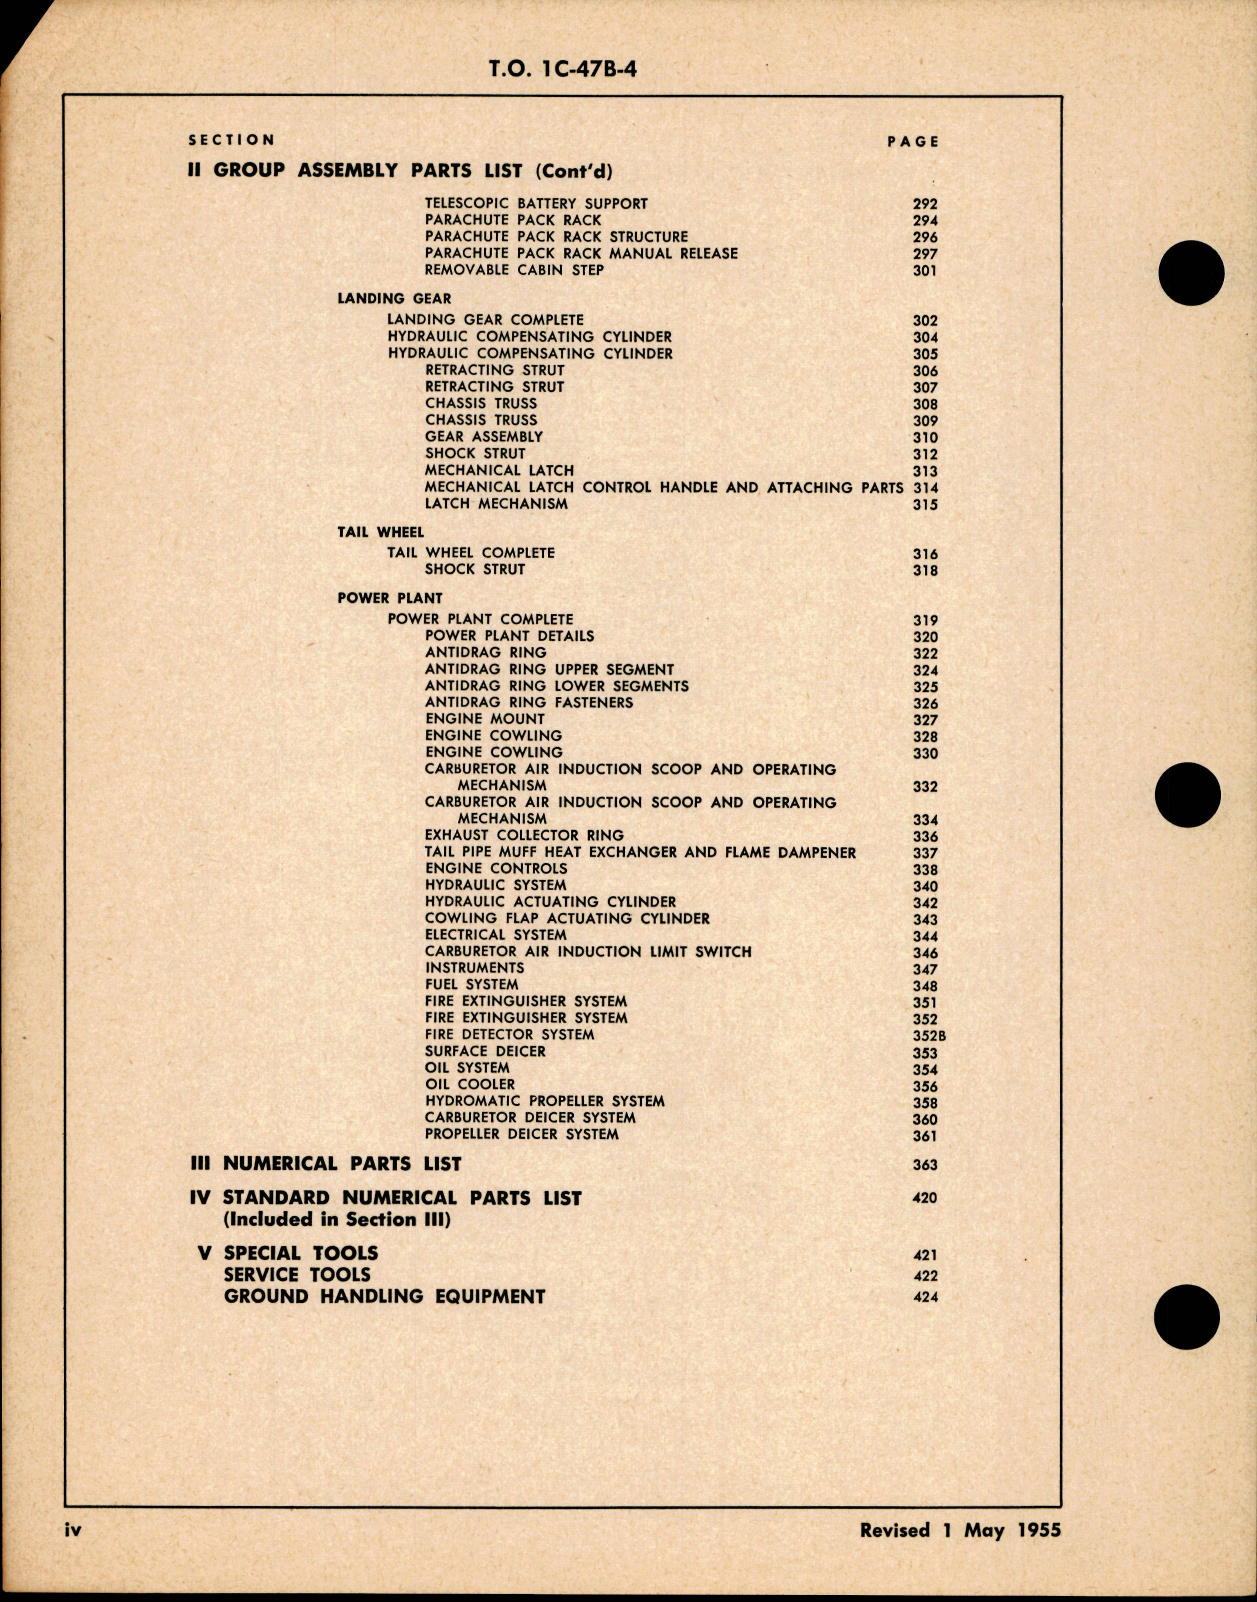 Sample page 6 from AirCorps Library document: Illustrated Parts Breakdown for C-47B, D, and R4D-6